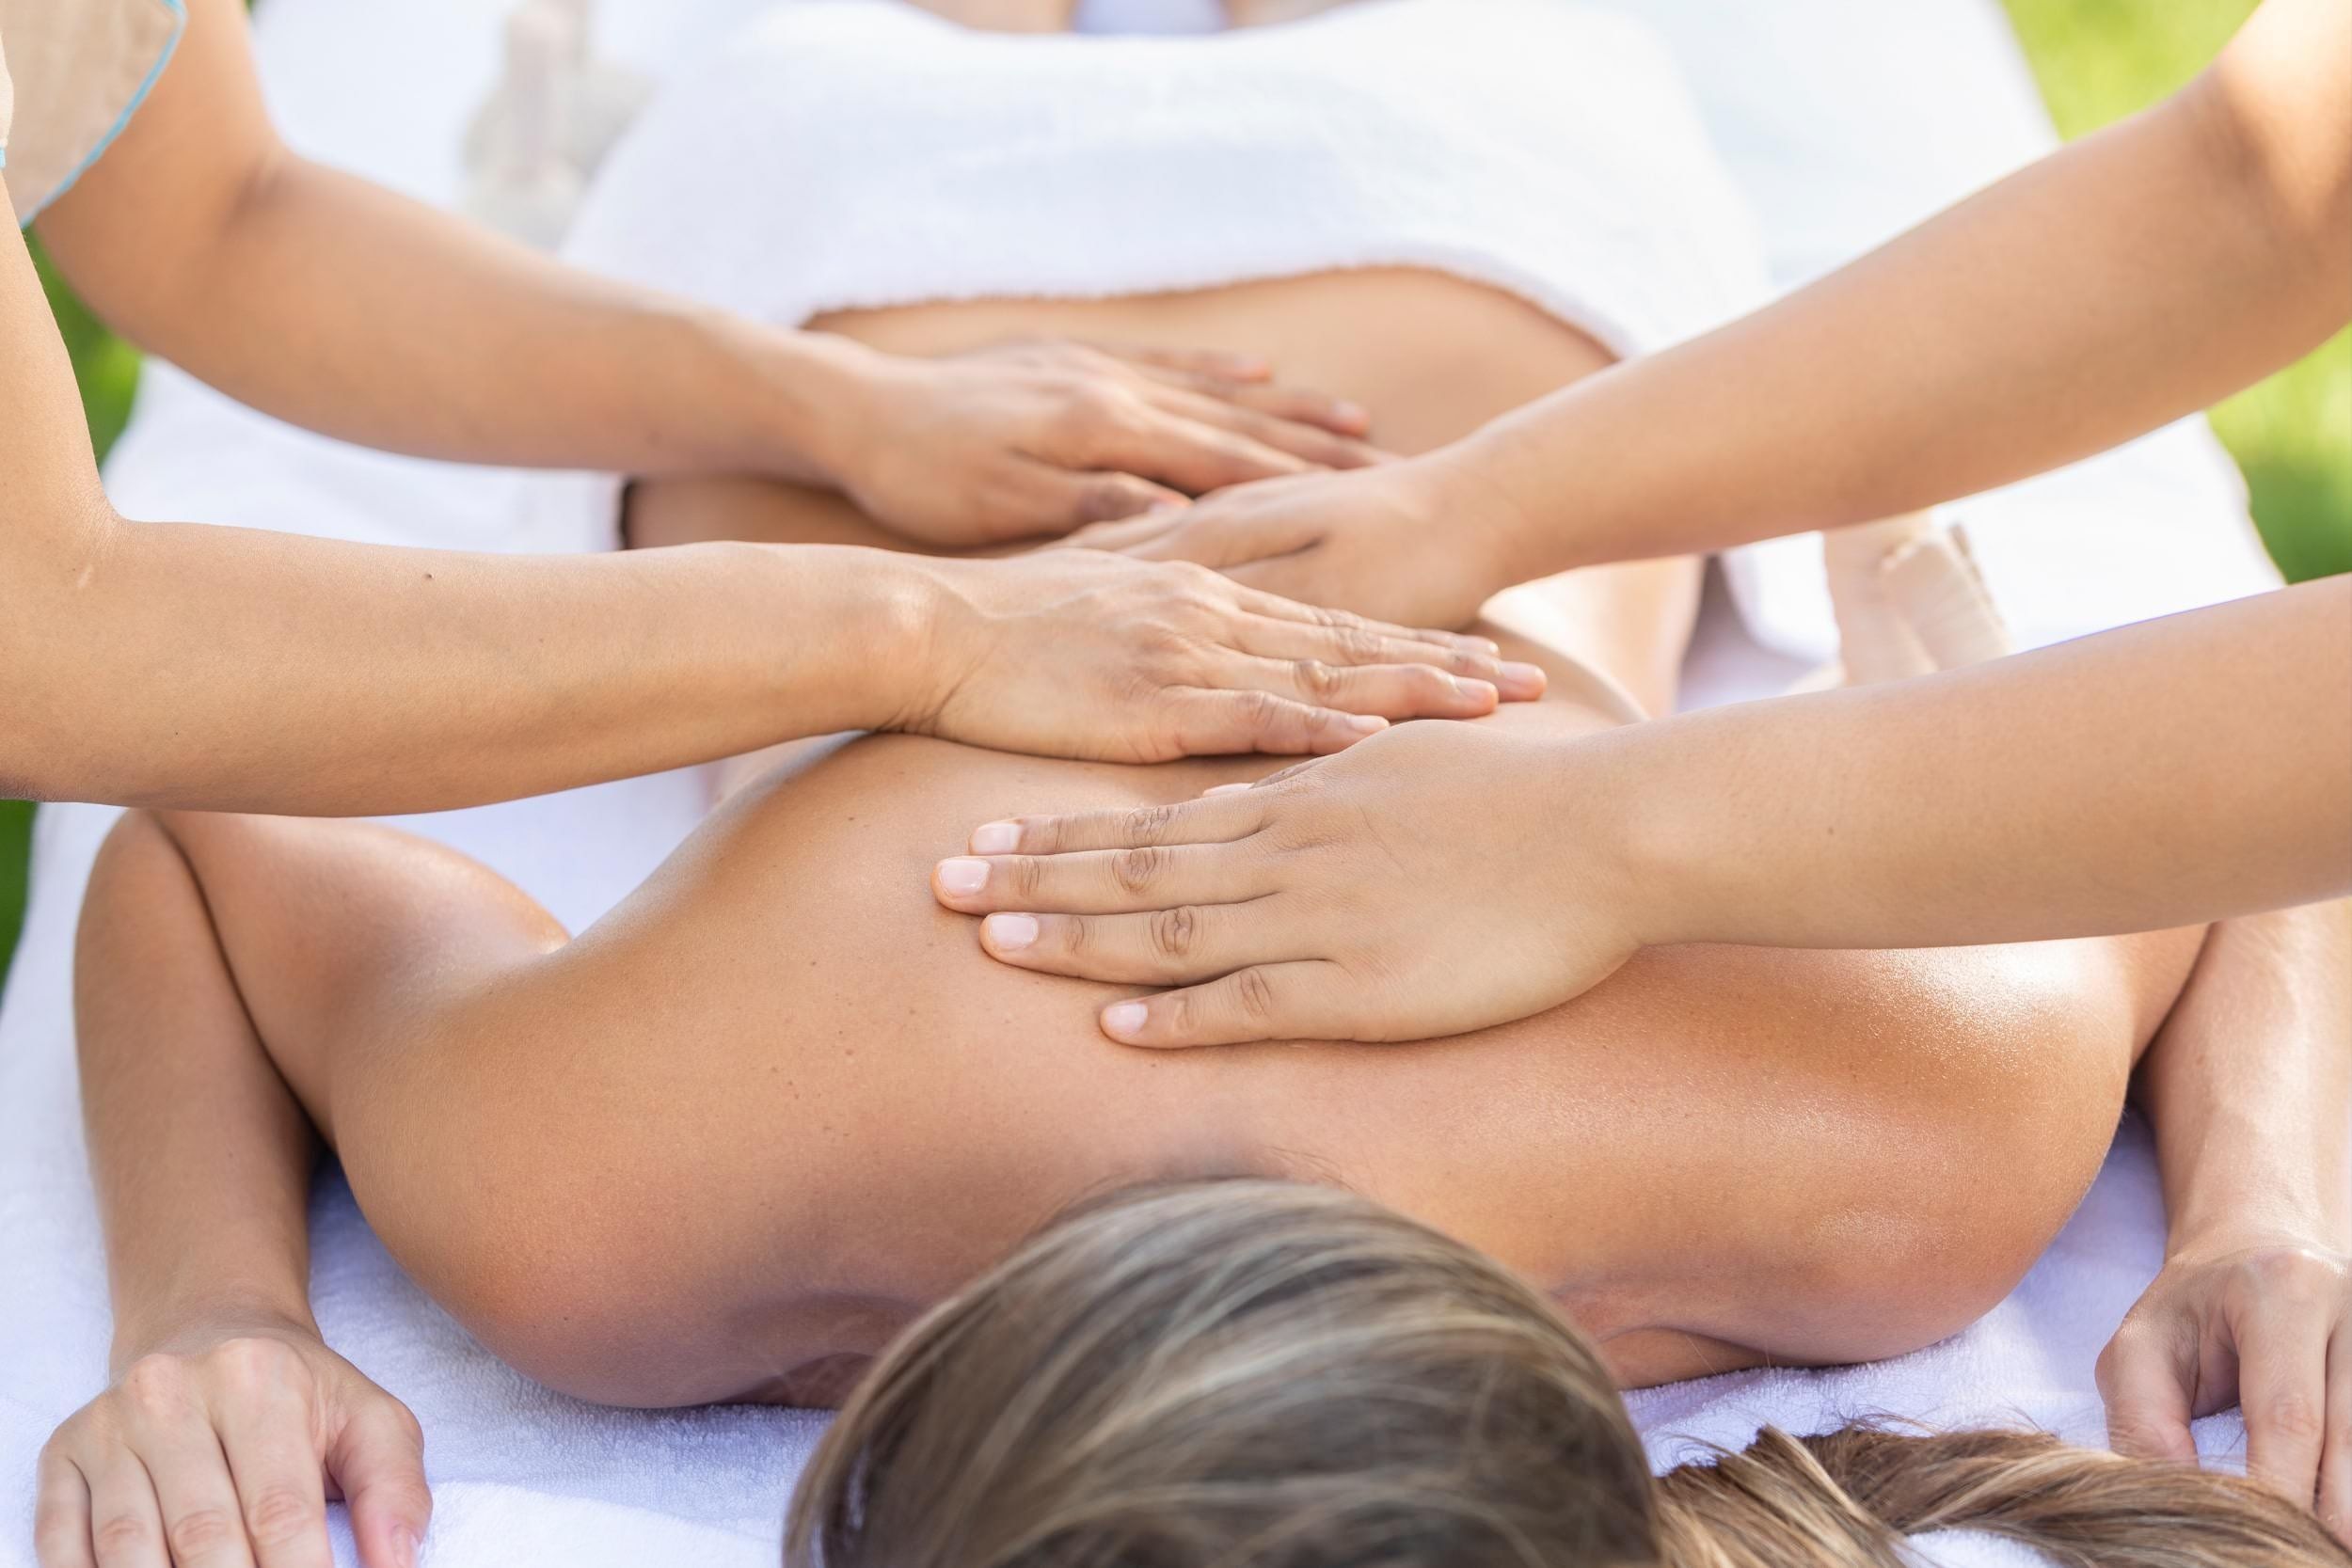 The Ultimate Guide To Tipping For A 4-Handed Massage: Should You Tip Both Therapists?